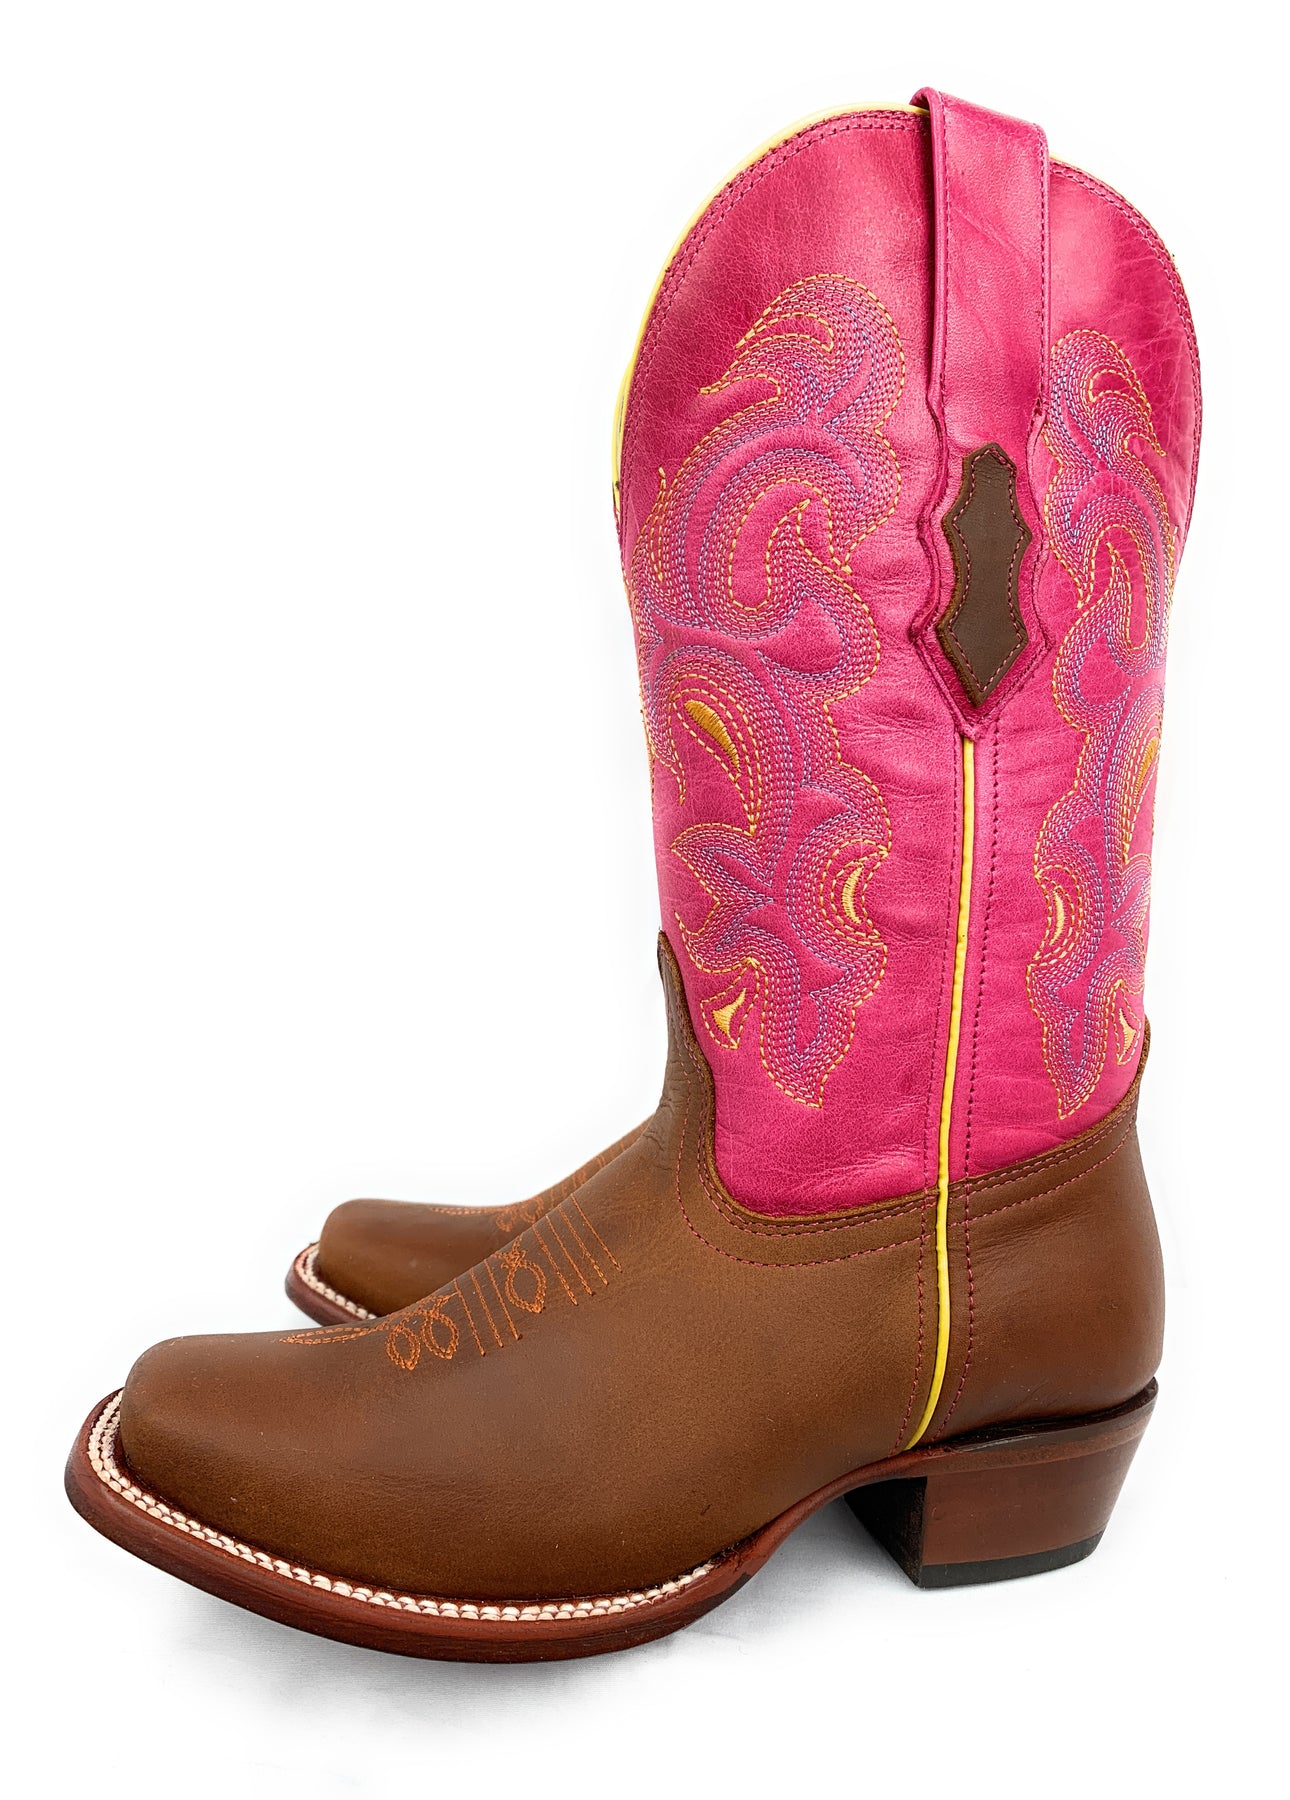 cowboy boots for women pink